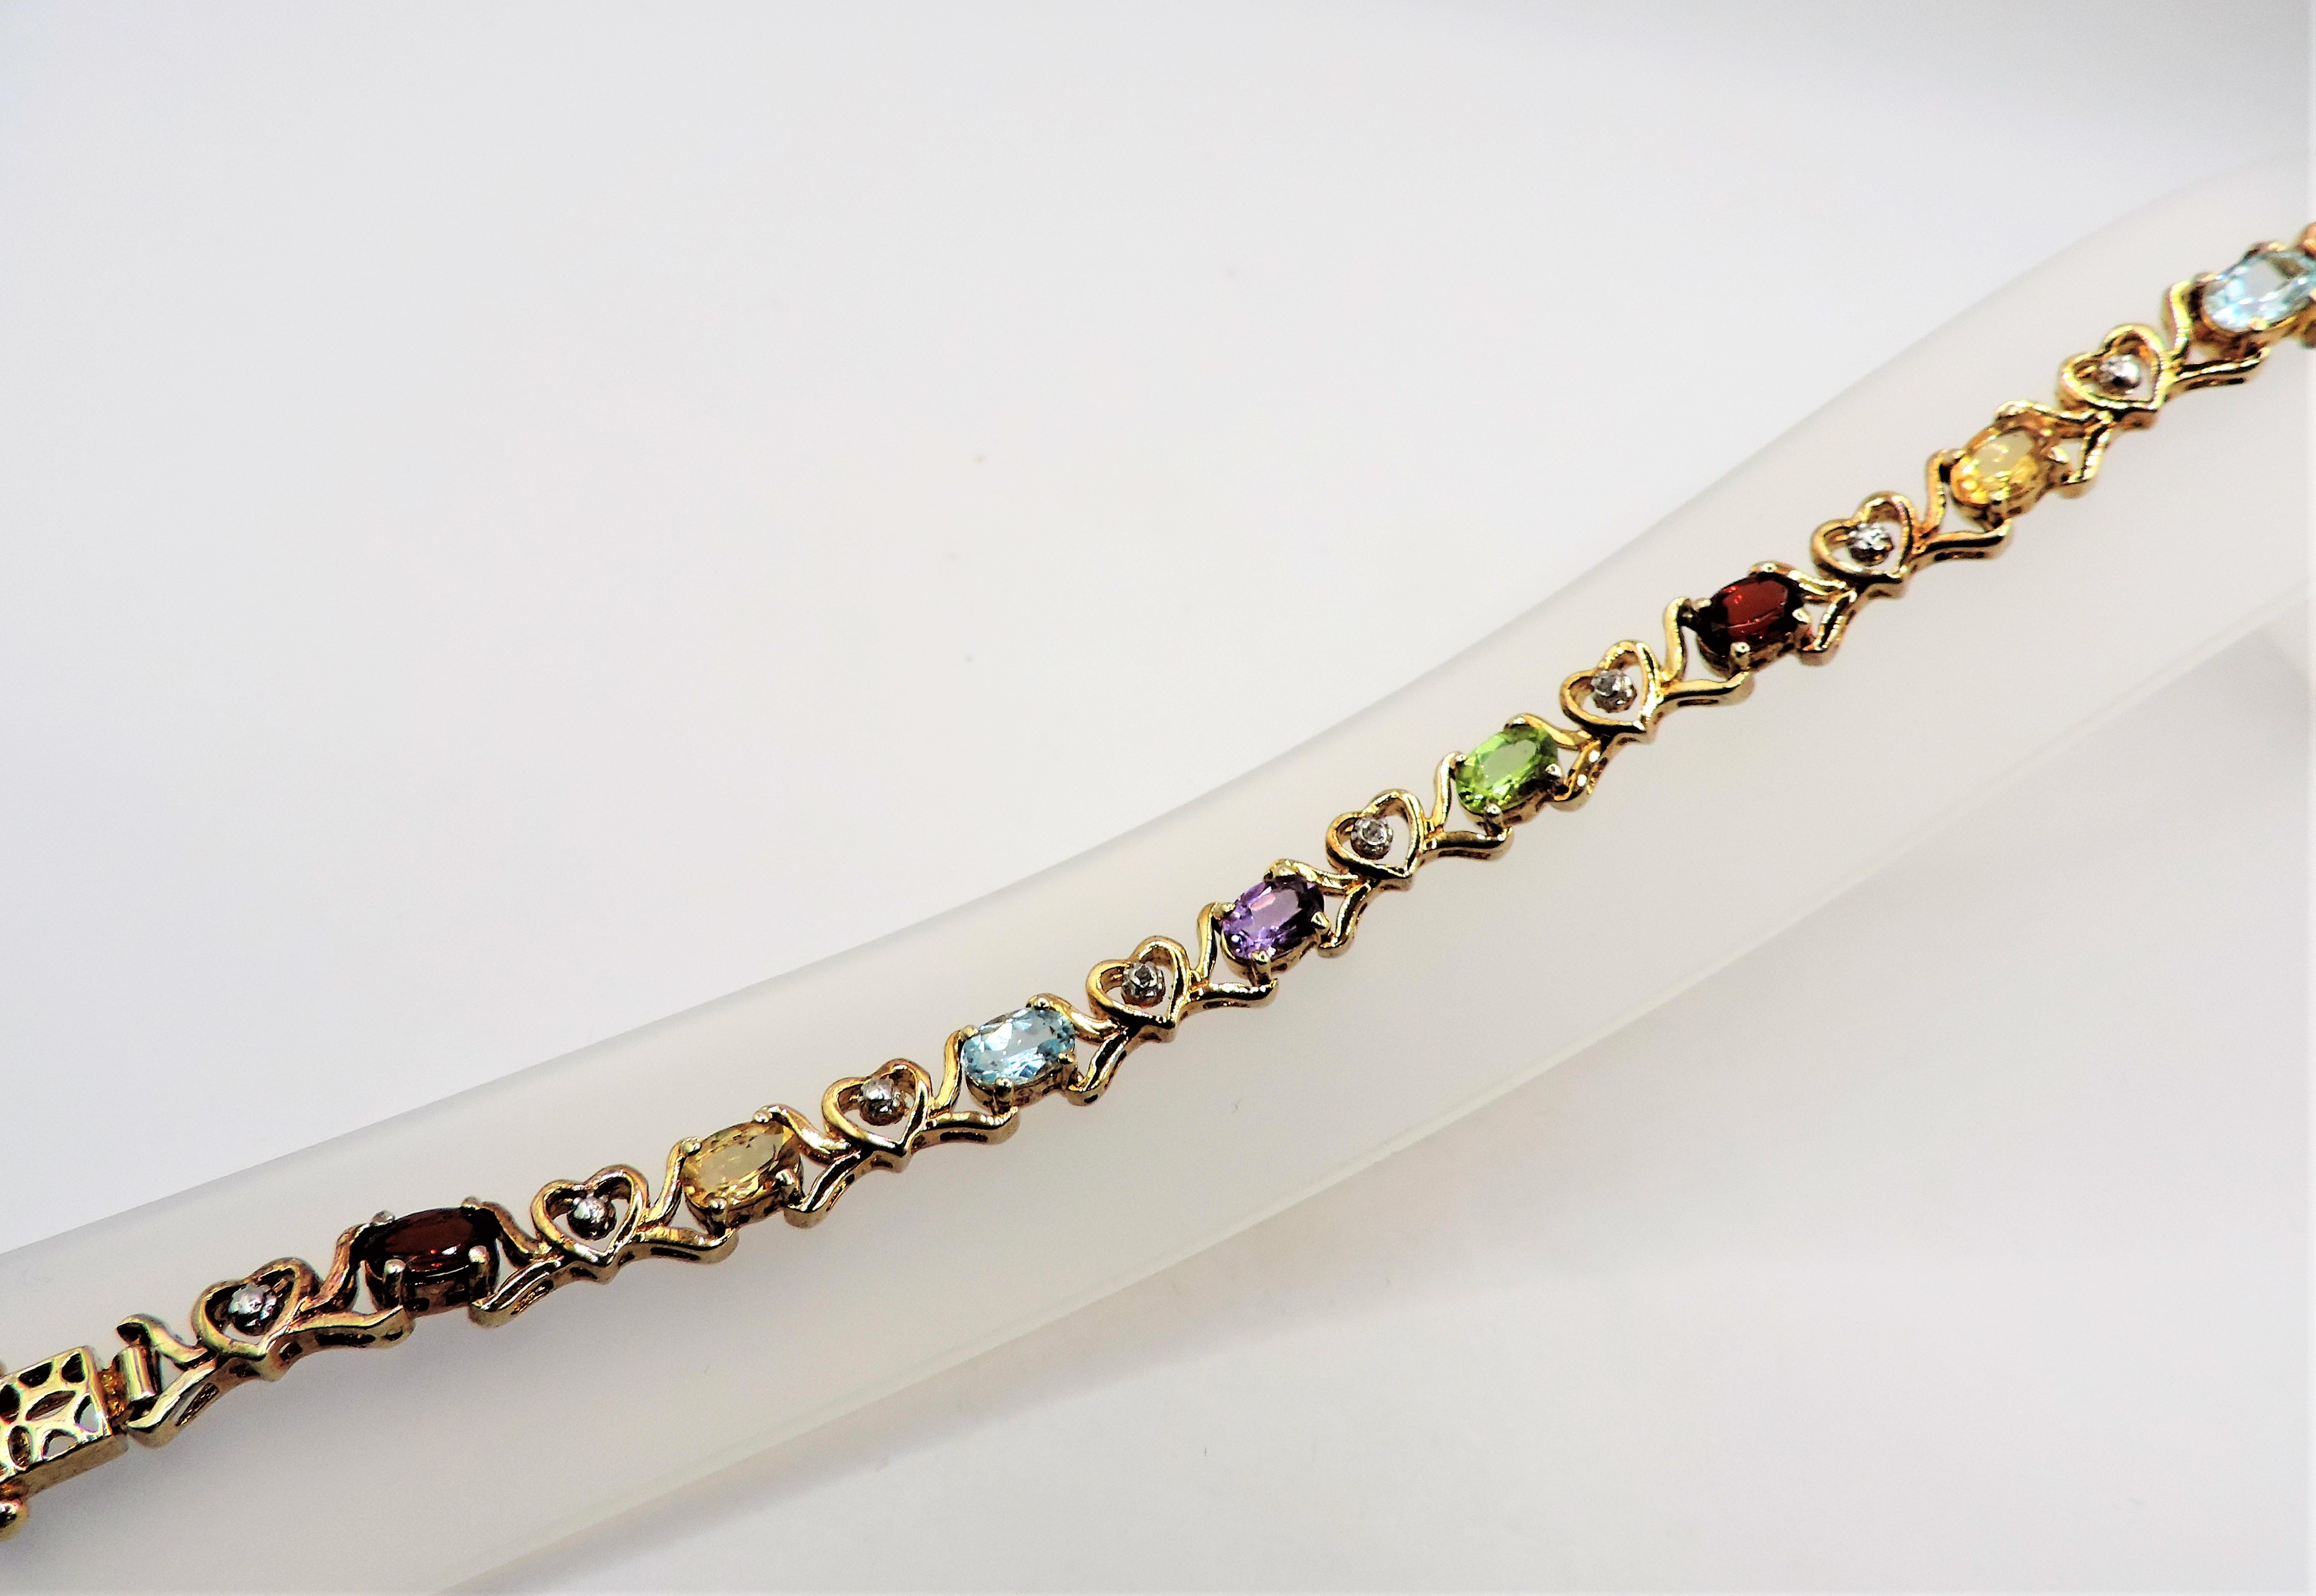 Gold on Sterling Silver Multi Gemstone Bracelet with Gift Box - Image 2 of 3